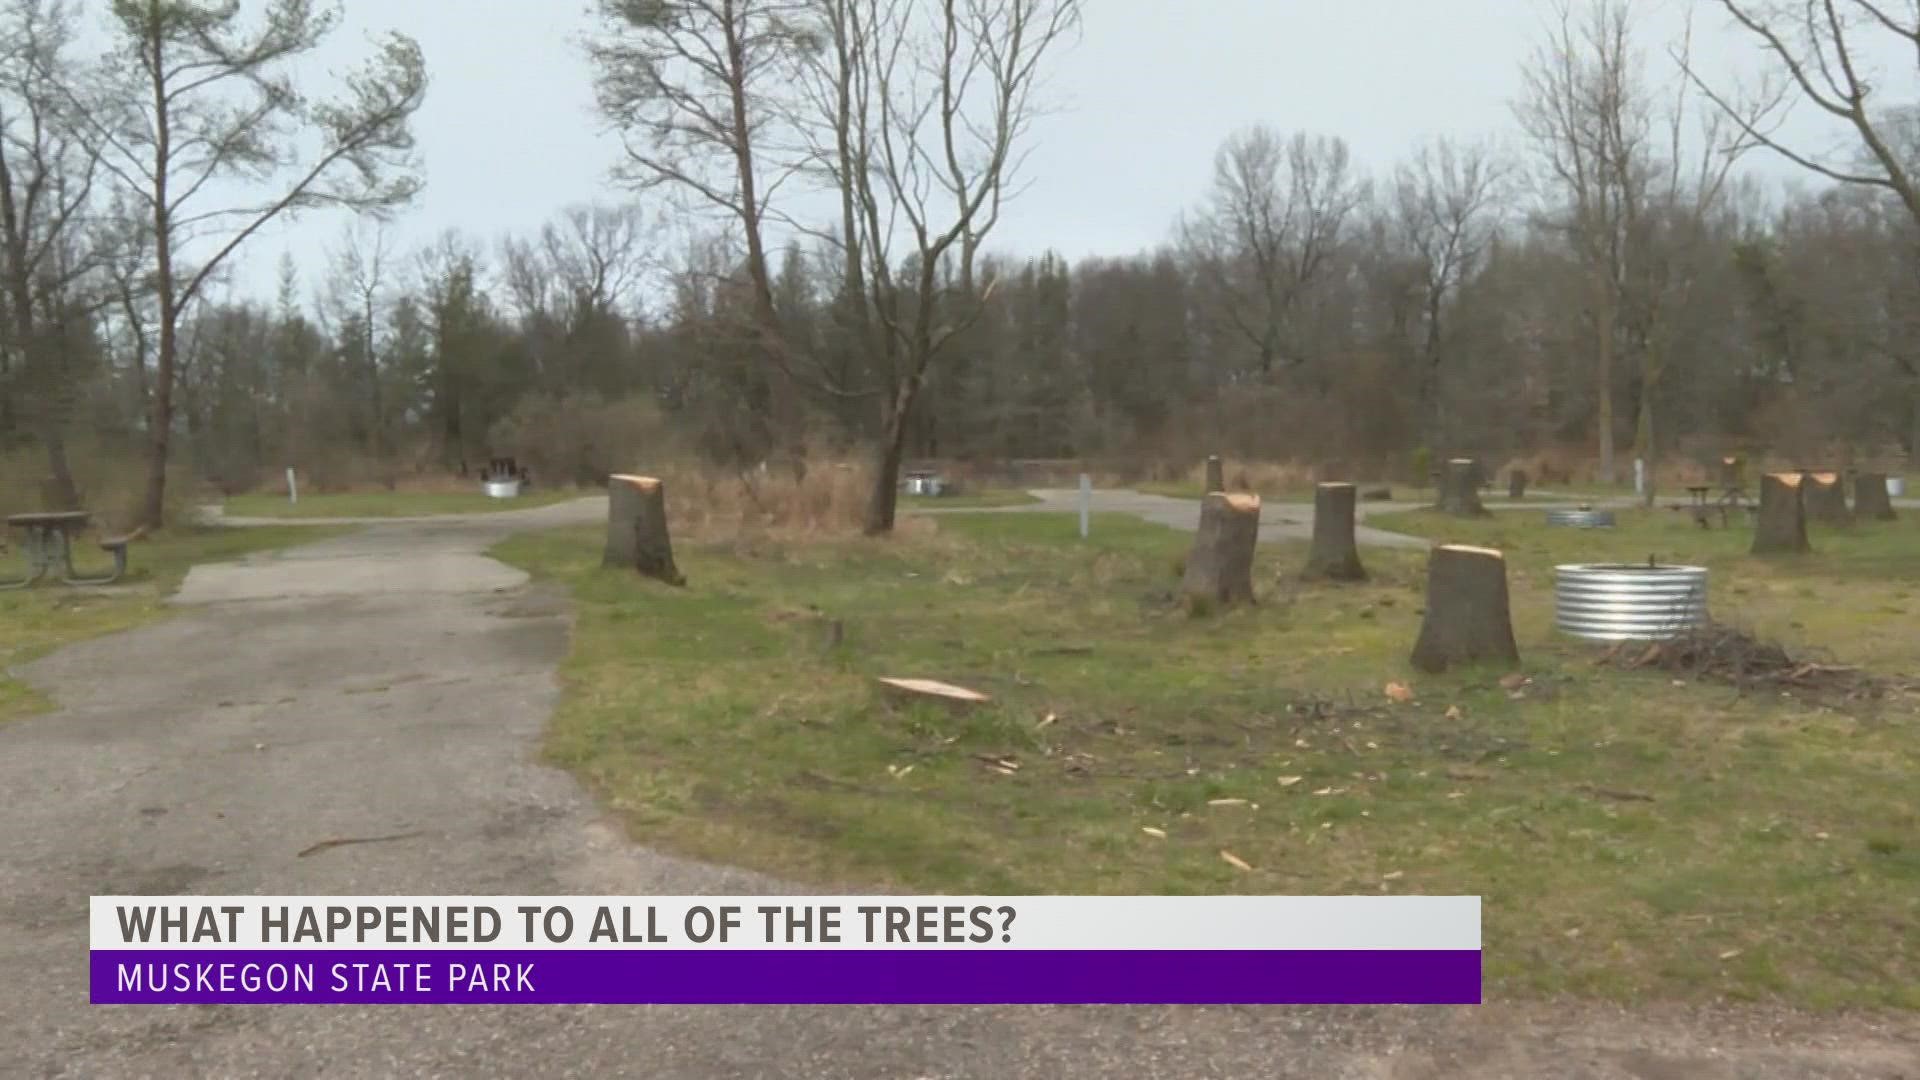 The trees died of 'wet feet' and posed a hazard to visitors, according to the DNR.